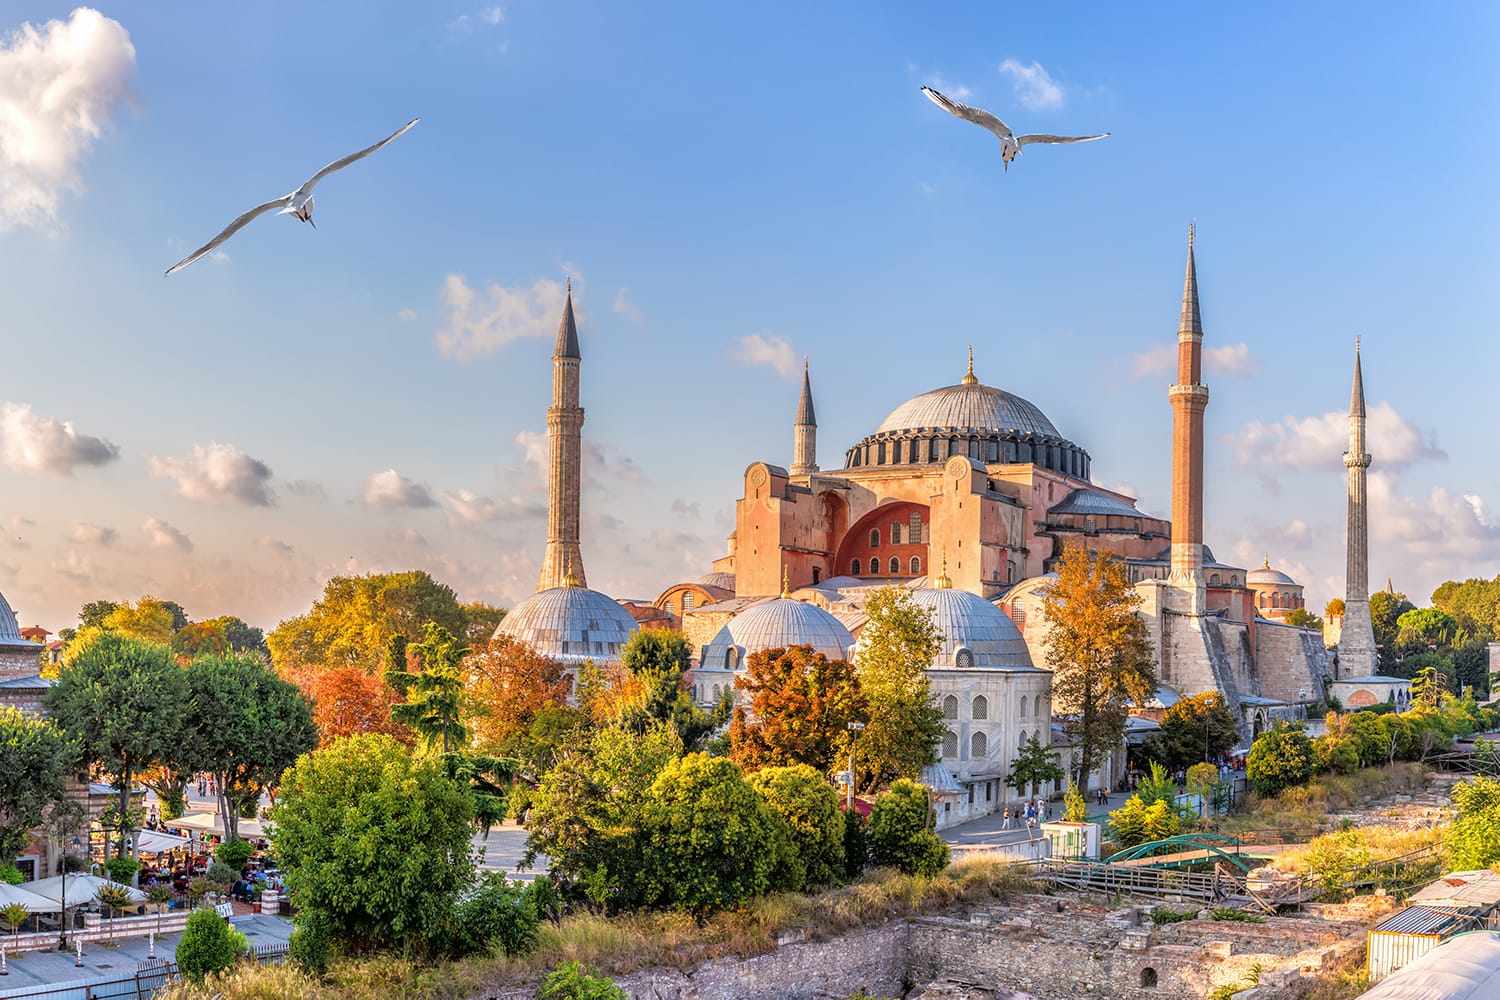 Istanbul Tour Packages - Book honeymoon ,family,adventure tour packages to Istanbul |Travel Knits